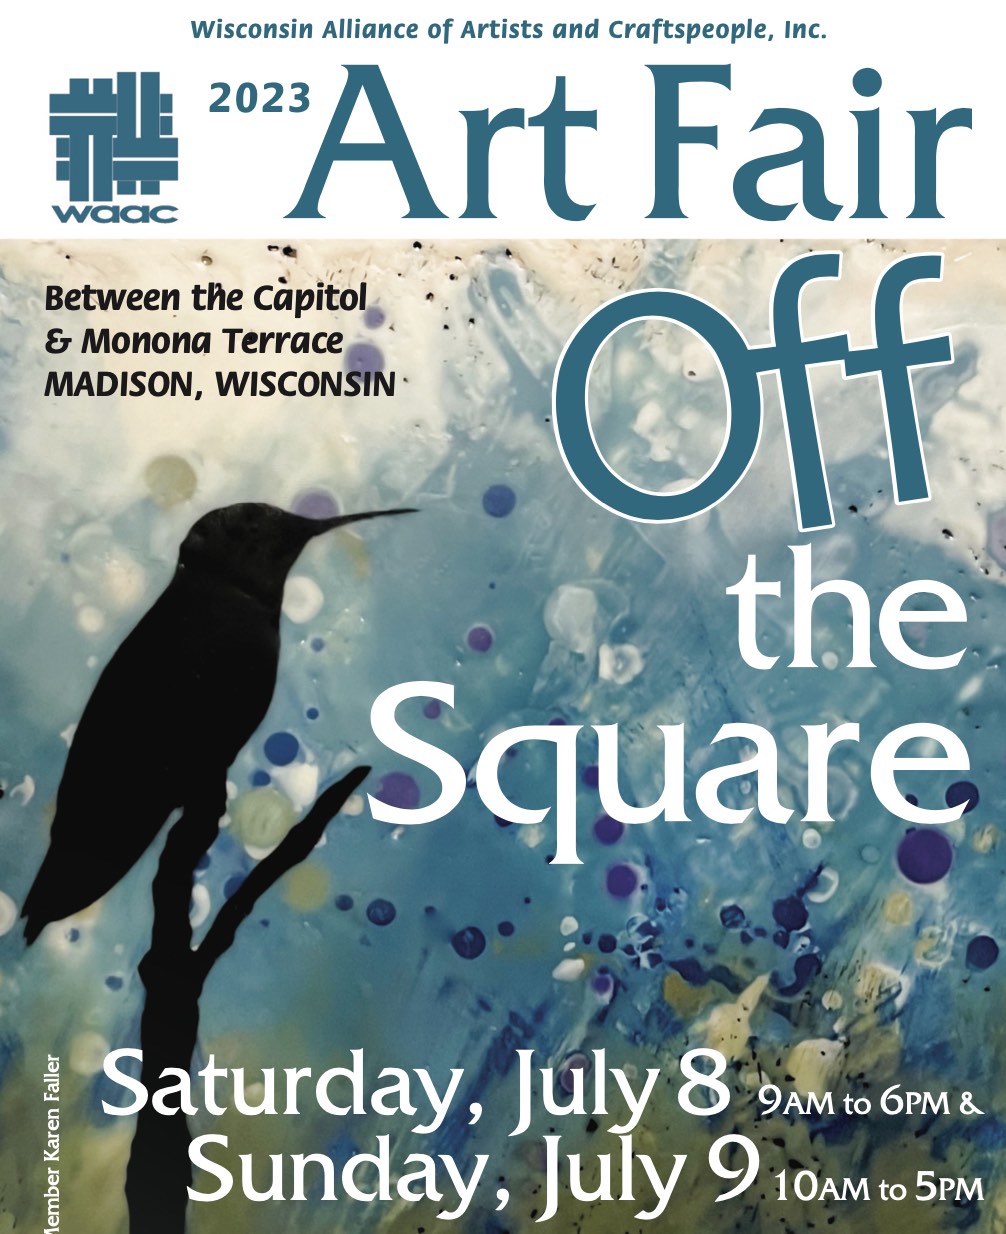 ZAPP Event Information Art Fair Off the Square 2023 Madison, WI